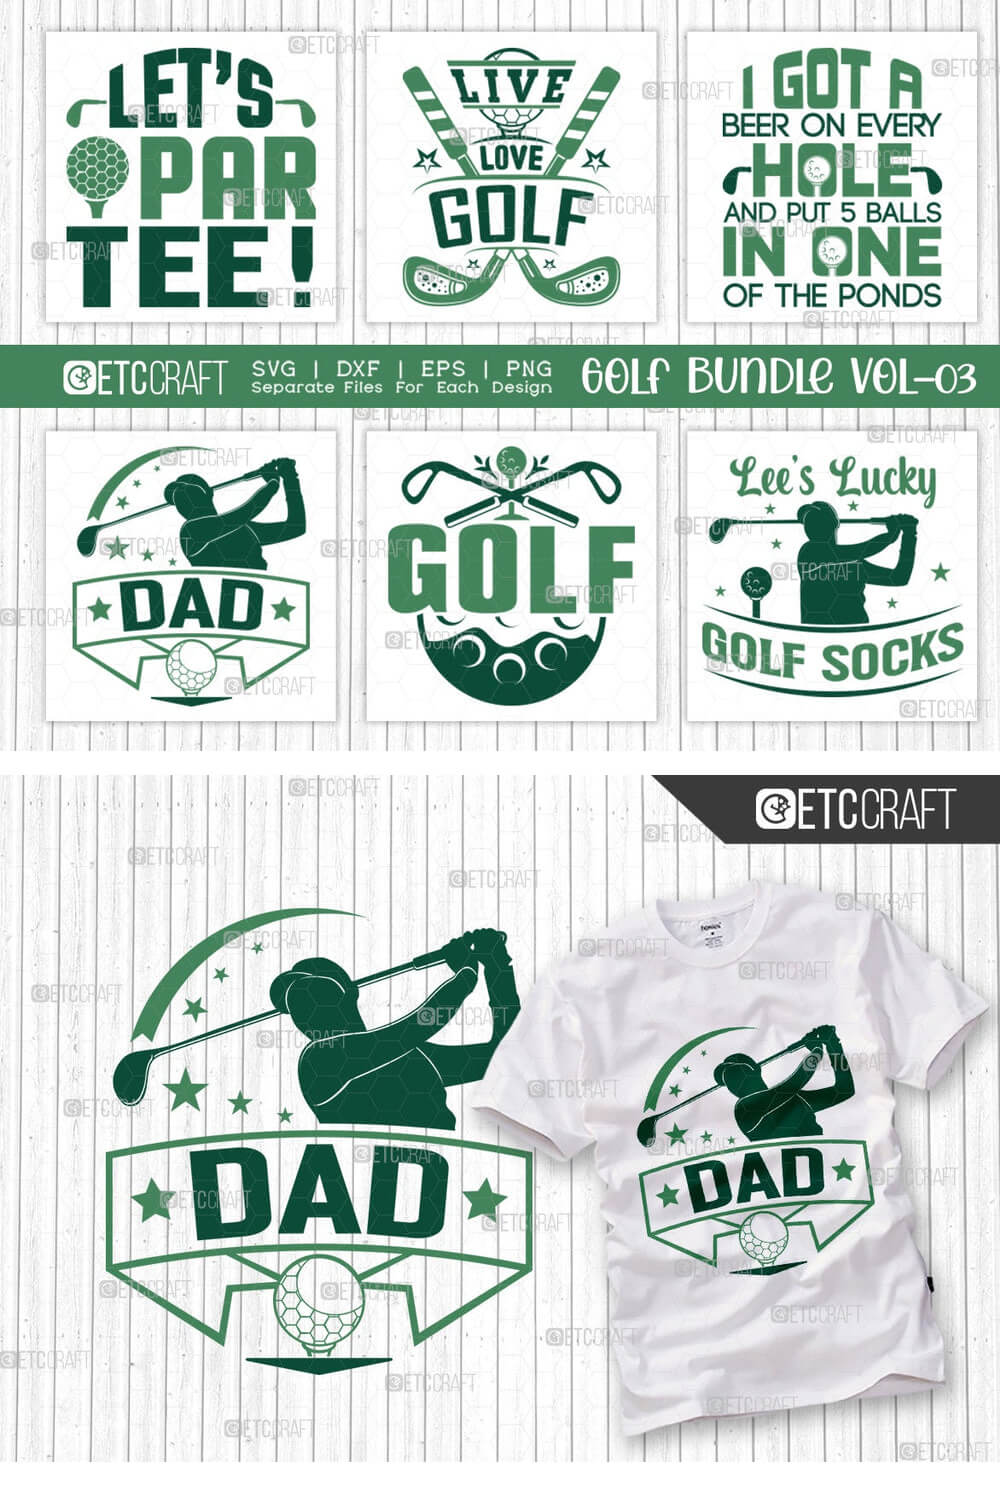 Six golf themed emblems: Let's par tee, Live love Golf, I got a beer on every Hole and put 5 balls, In one of the ponds.